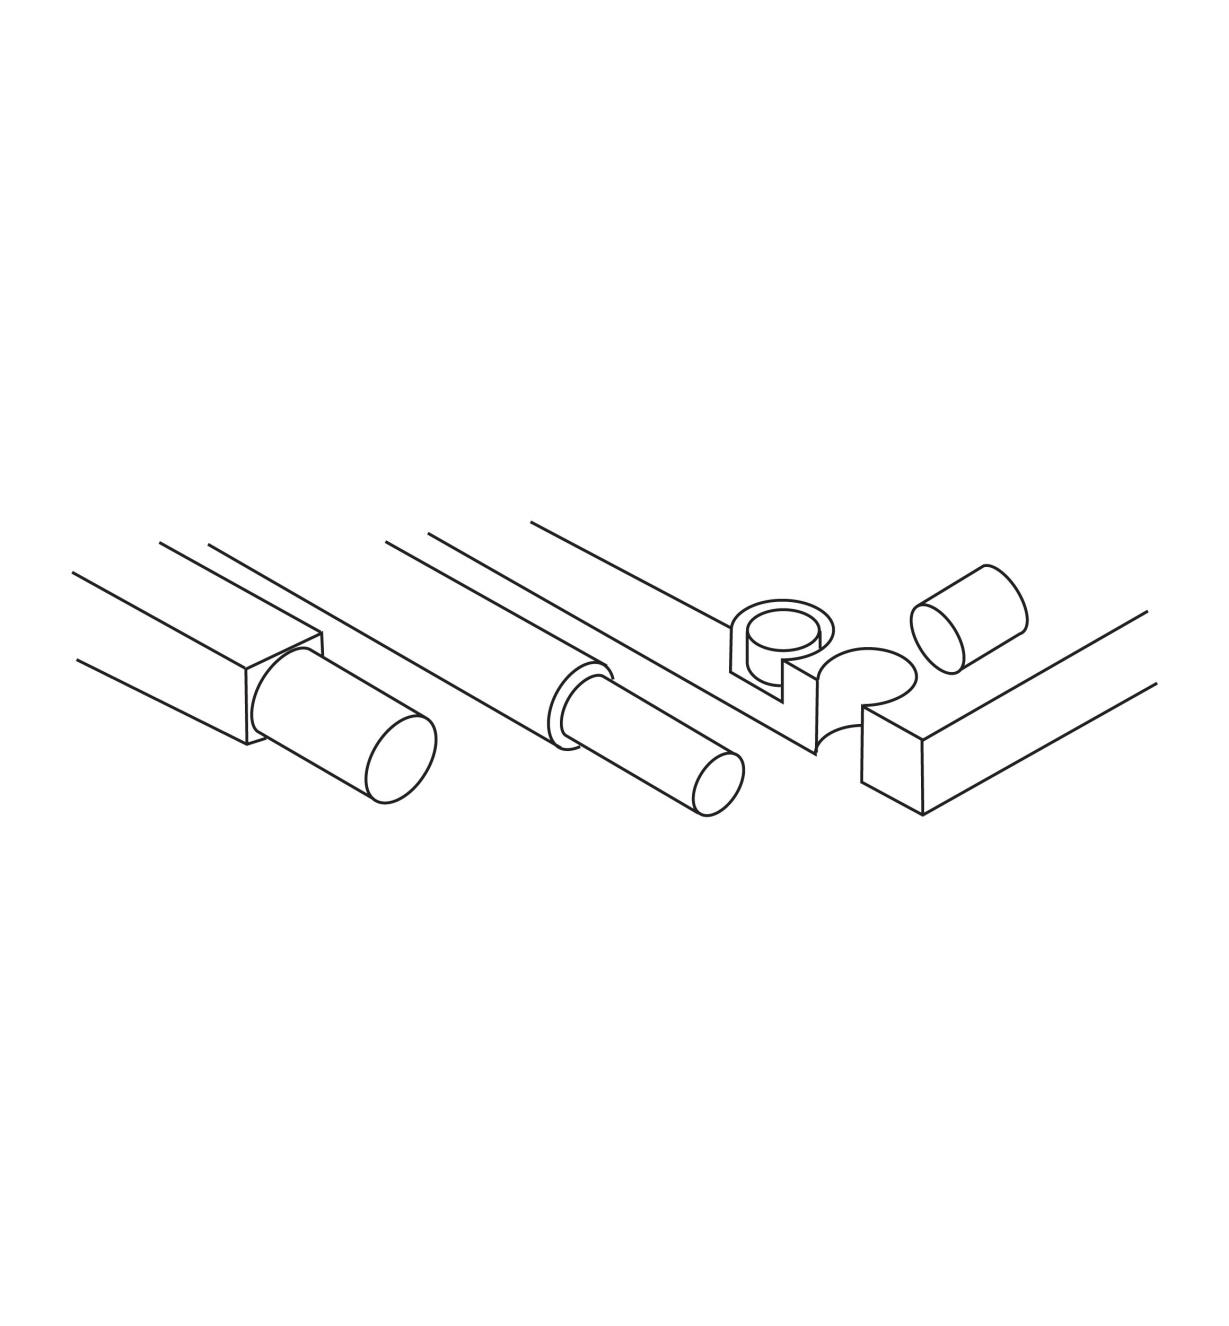 Illustration of tenons and plugs cut with the dowel, plug and tenon cutters